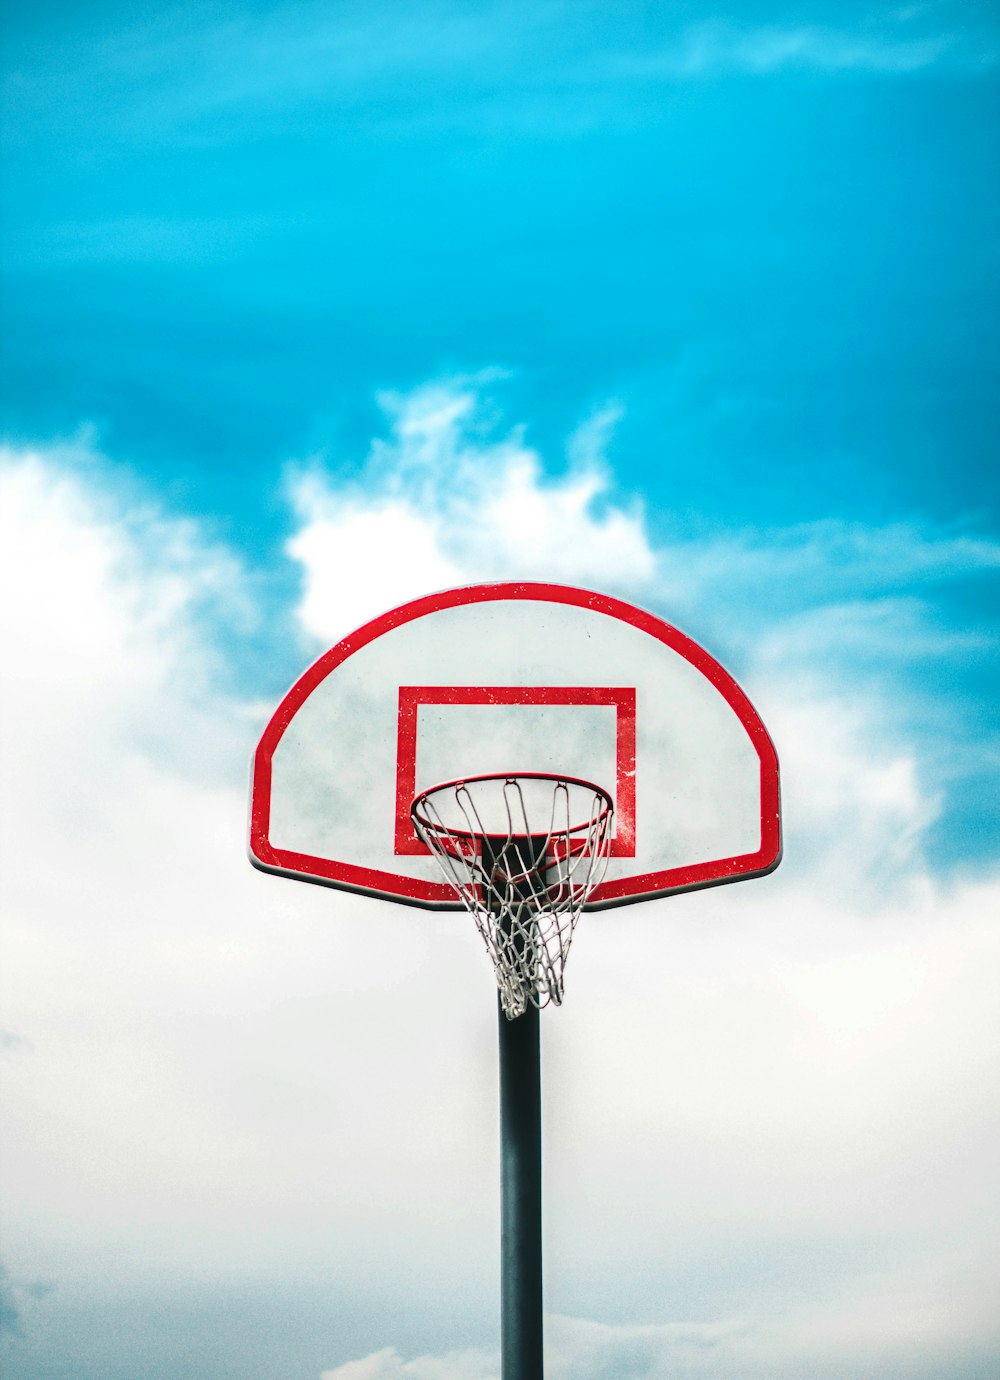 red and black basketball hoop under cloudy sky